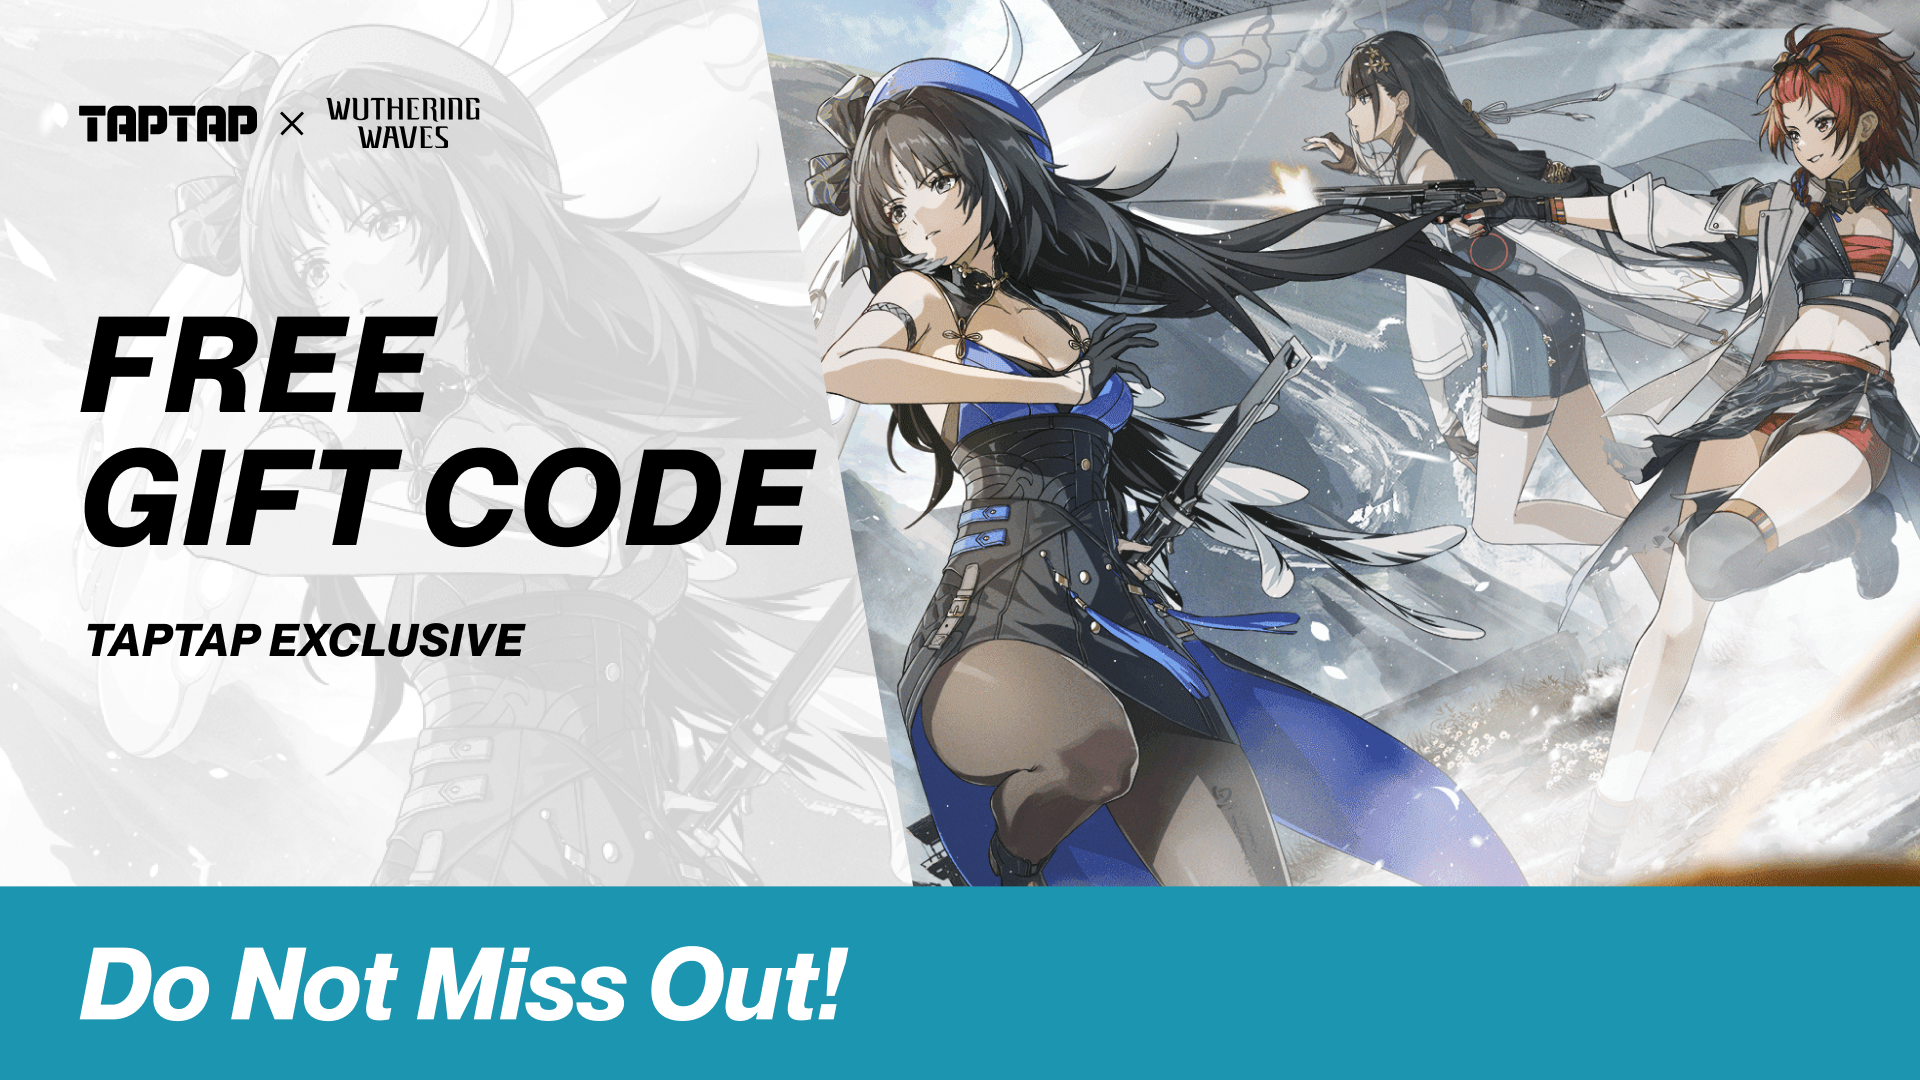 Hurry up and claim your exclusive TapTap gift code for Wuthering Waves!